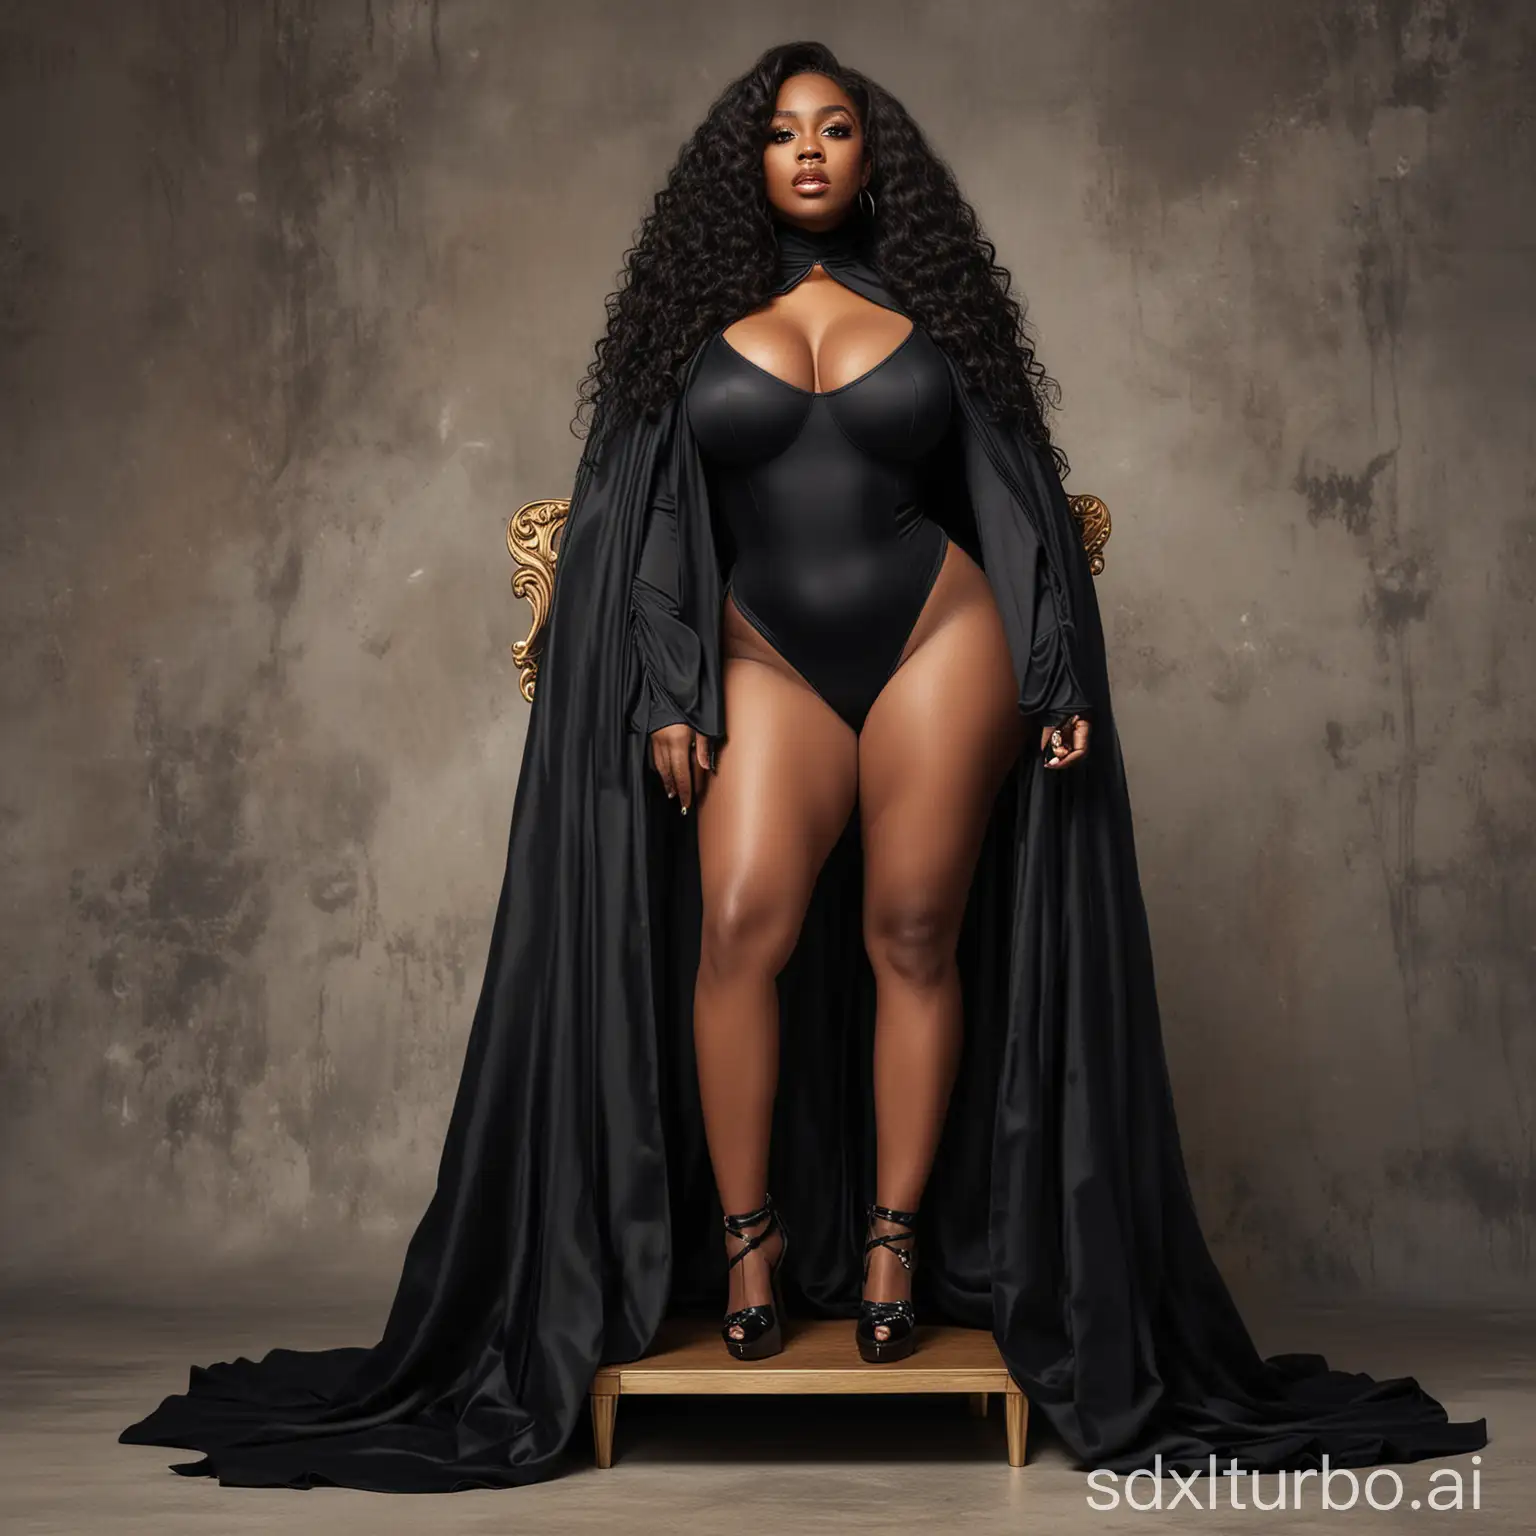 Elegant-Black-Queen-on-Throne-with-Regal-Cape-and-Heels